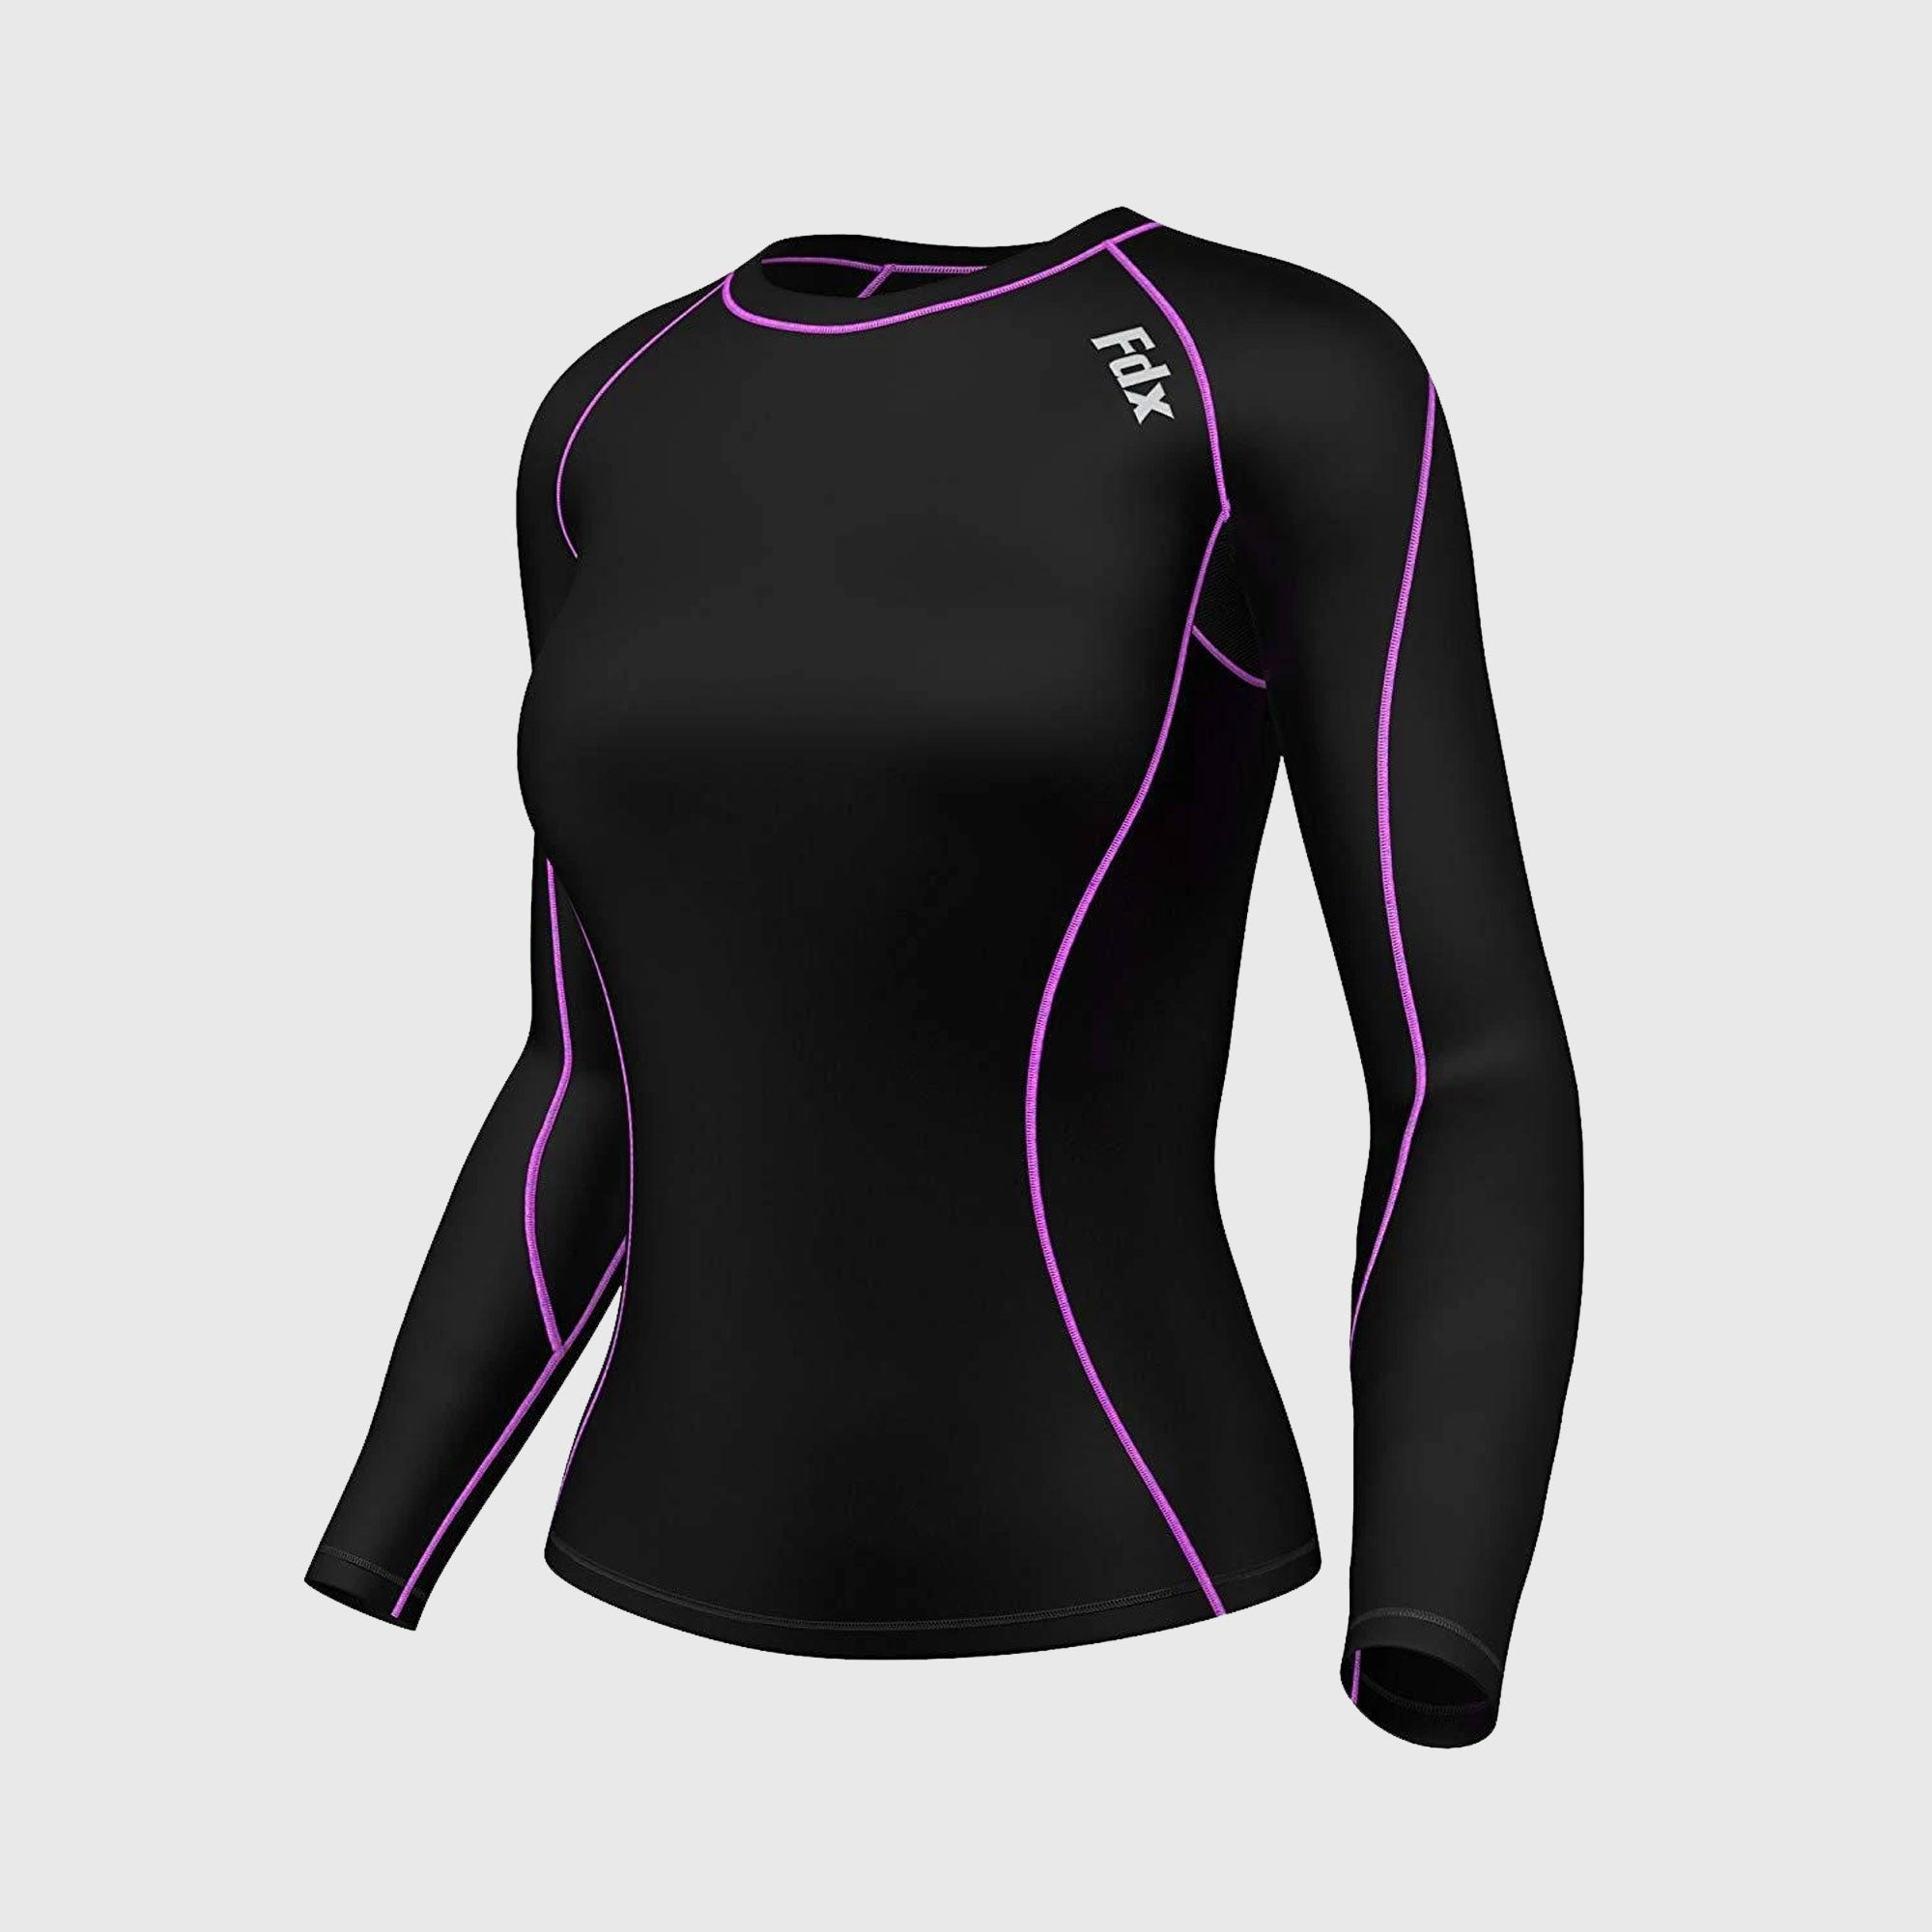 Fdx Women's Purple 7 Black Long Sleeve Ultralight Compression Top Running Gym Workout Wear Rash Guard Stretchable Breathable Quick Dry - Monarch